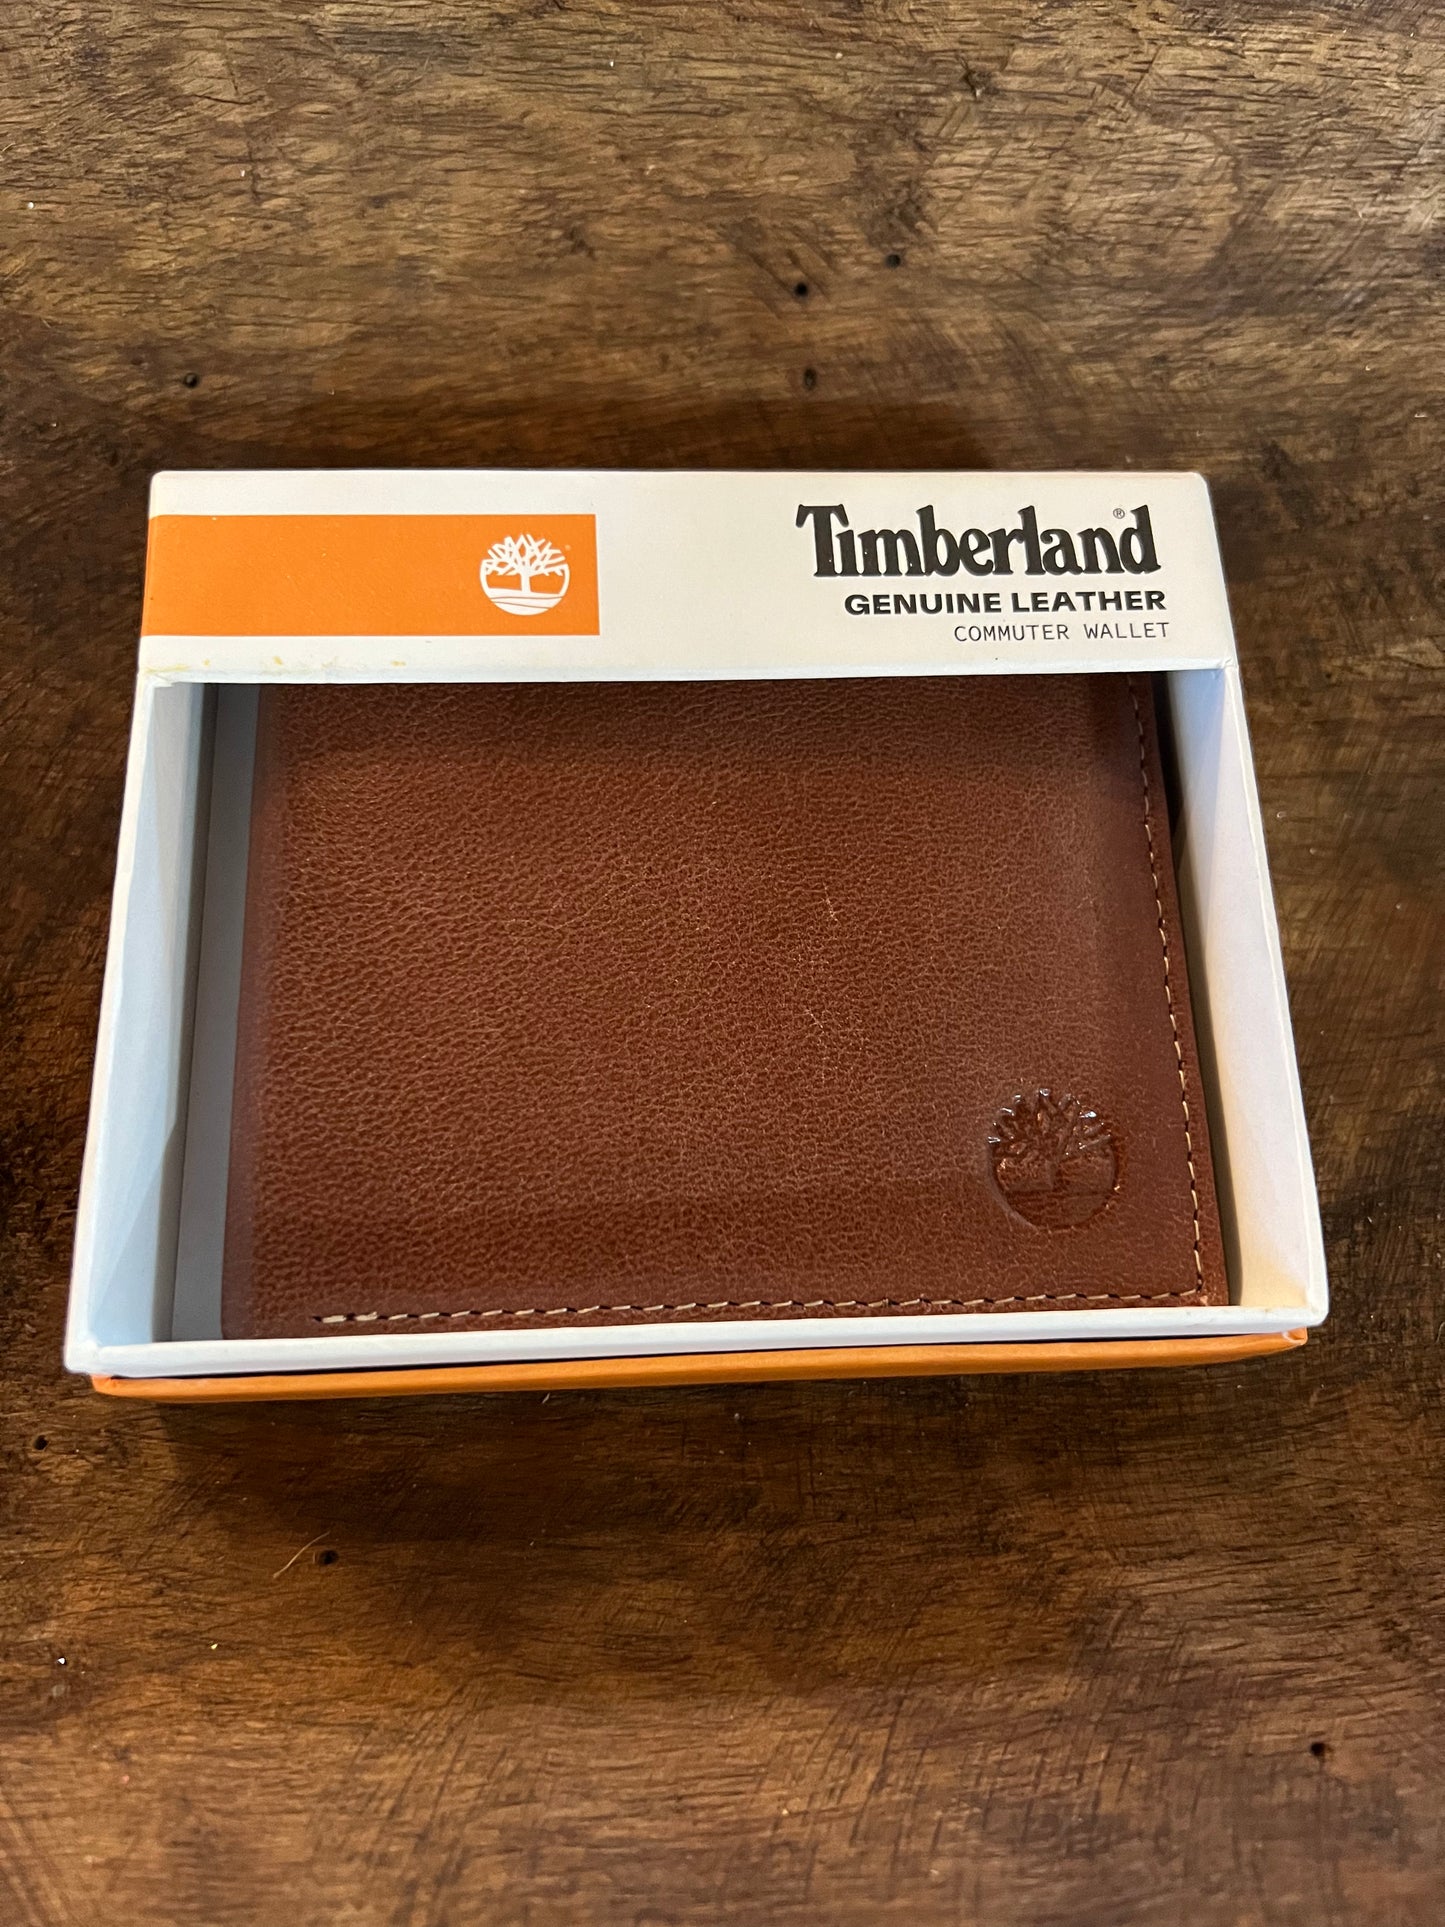 Timberland leather wallet